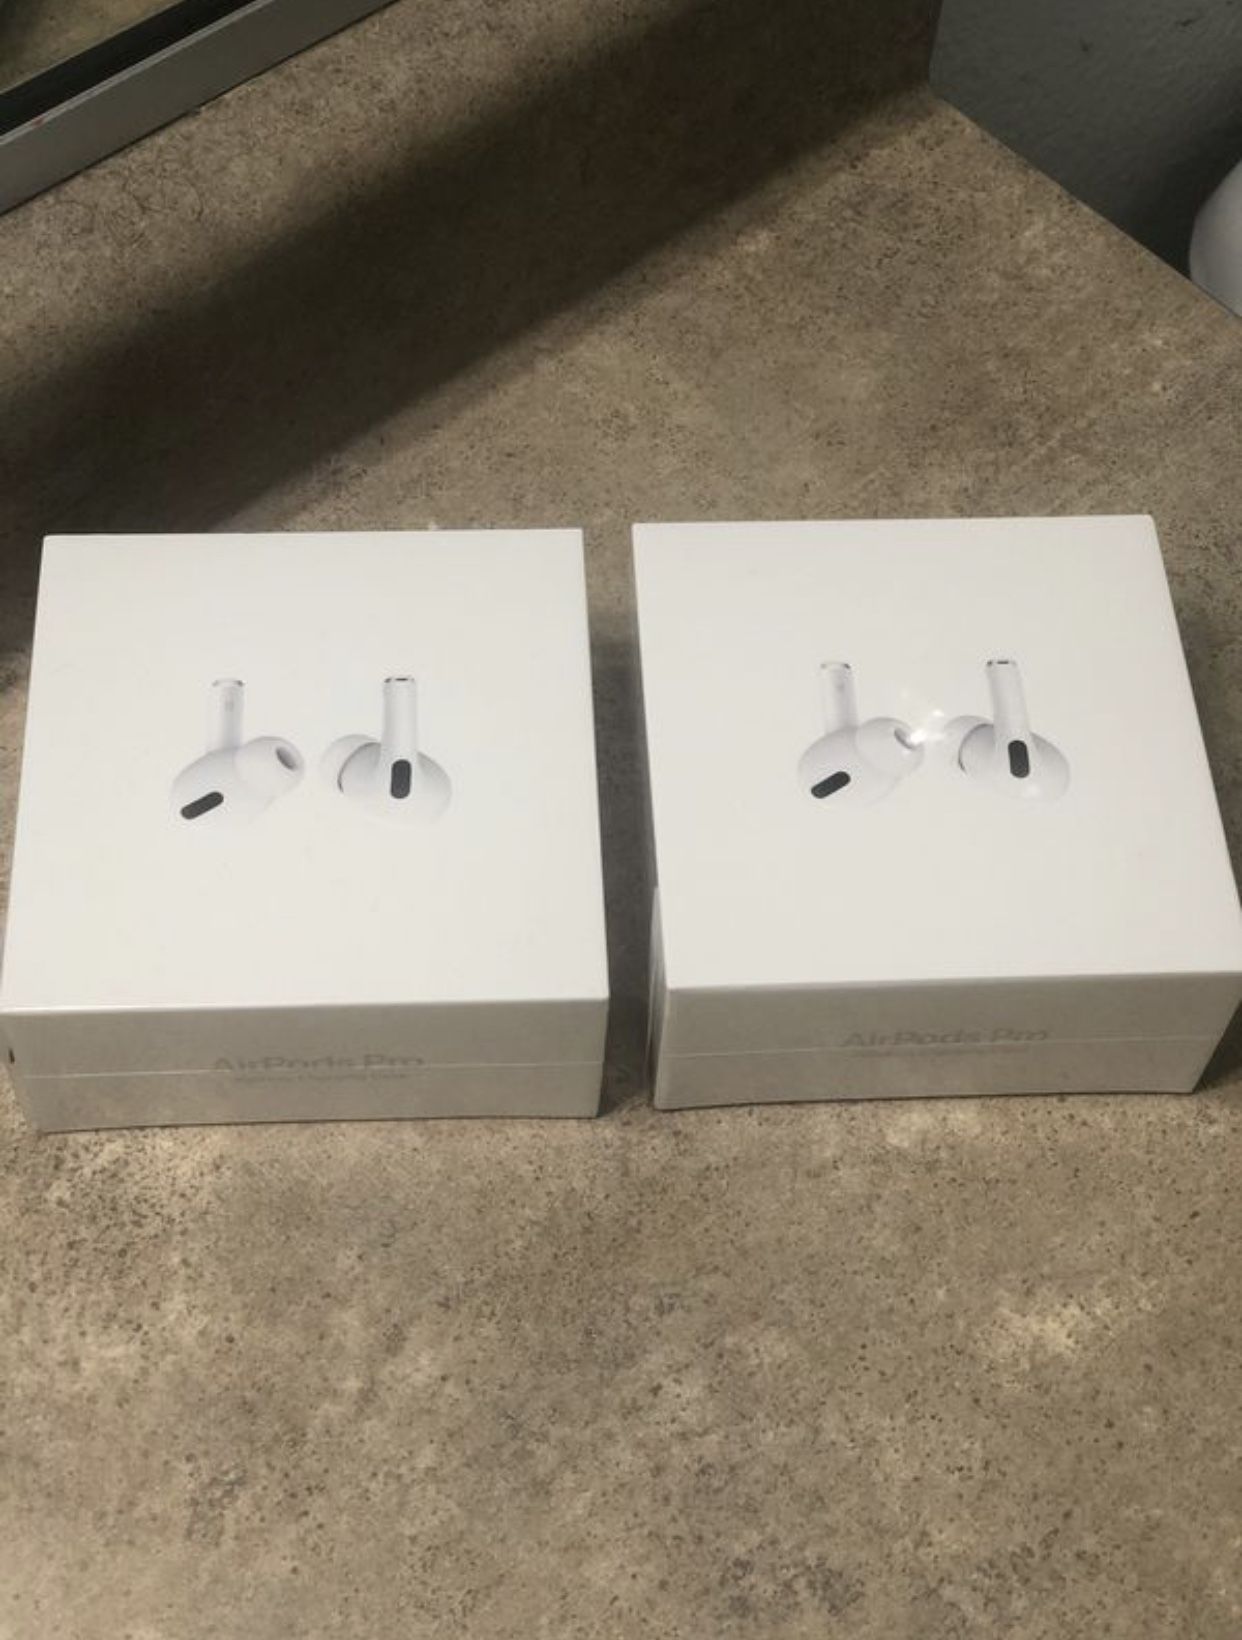 Airpods Pro | 1 For $200 2 For $350